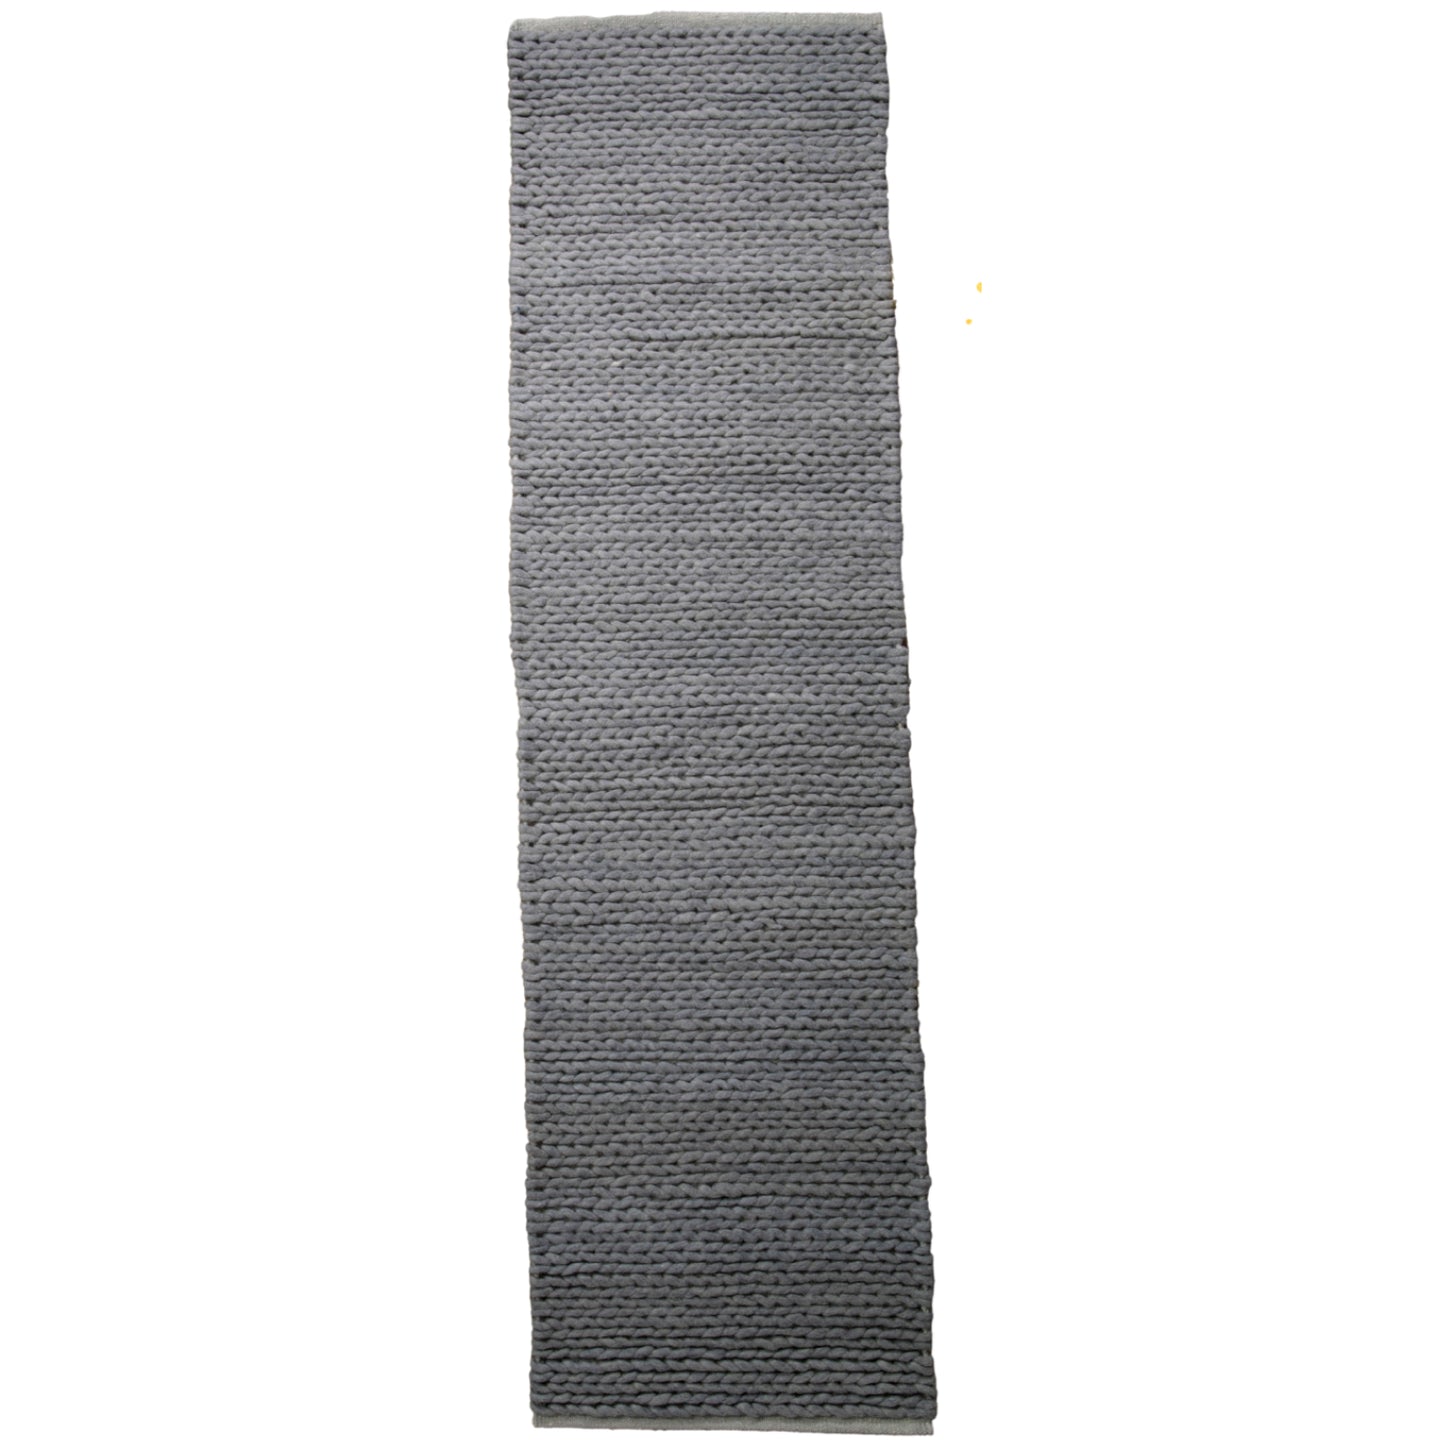 Grey knitted wool rug by Native